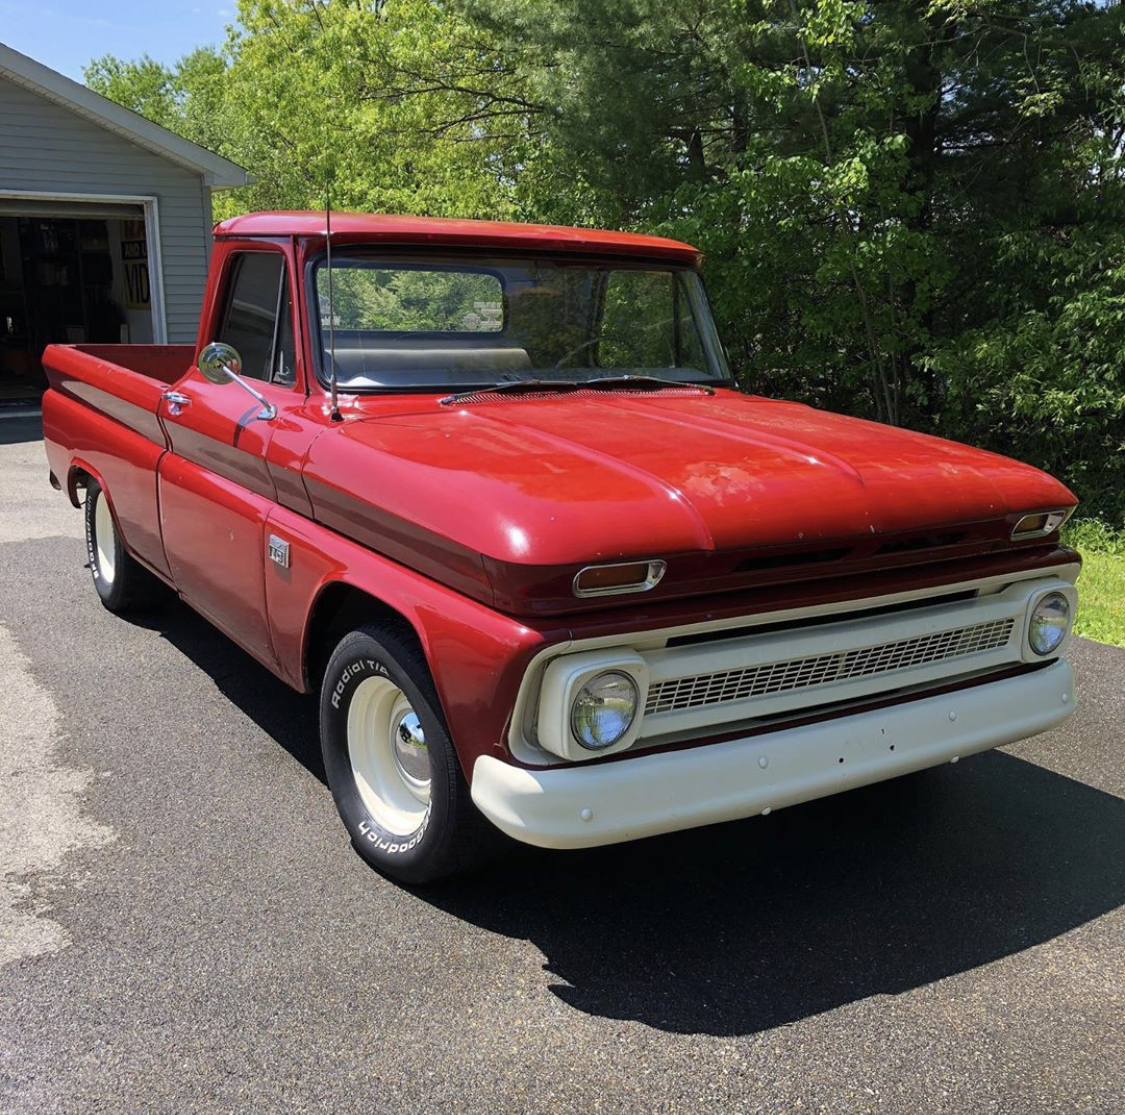 House of Chop restomod on a red ‘66 Chevy pickup